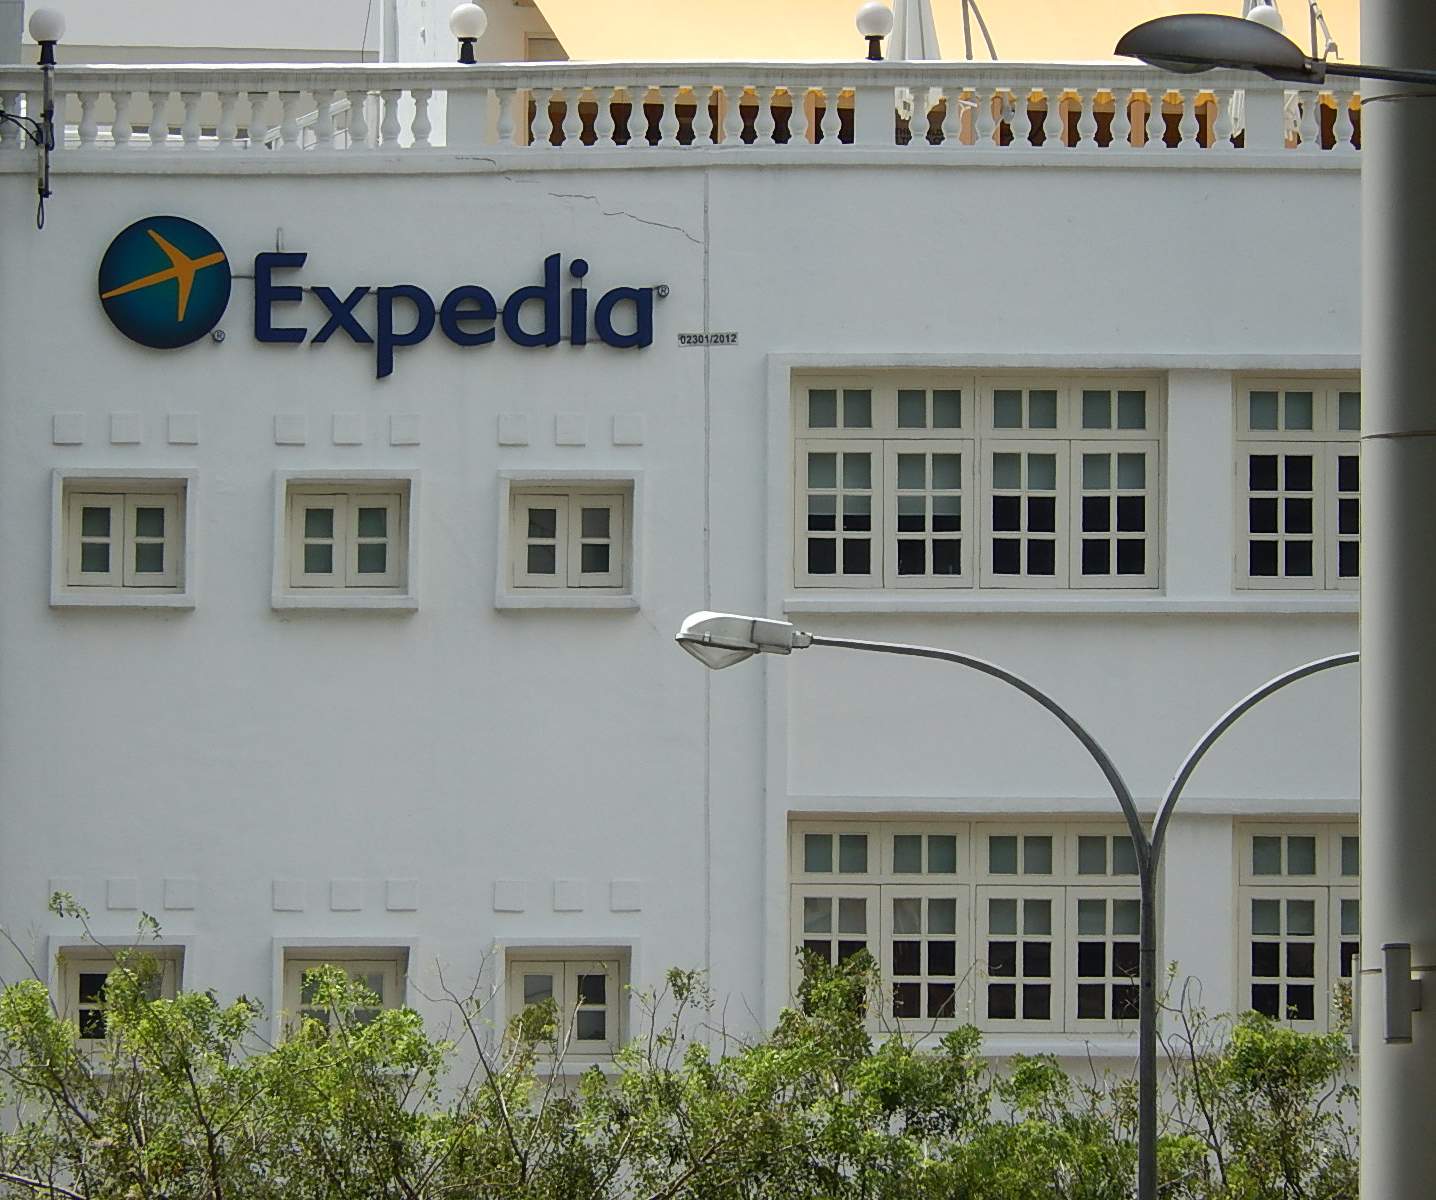 Expedia in the Real World by mikecogh